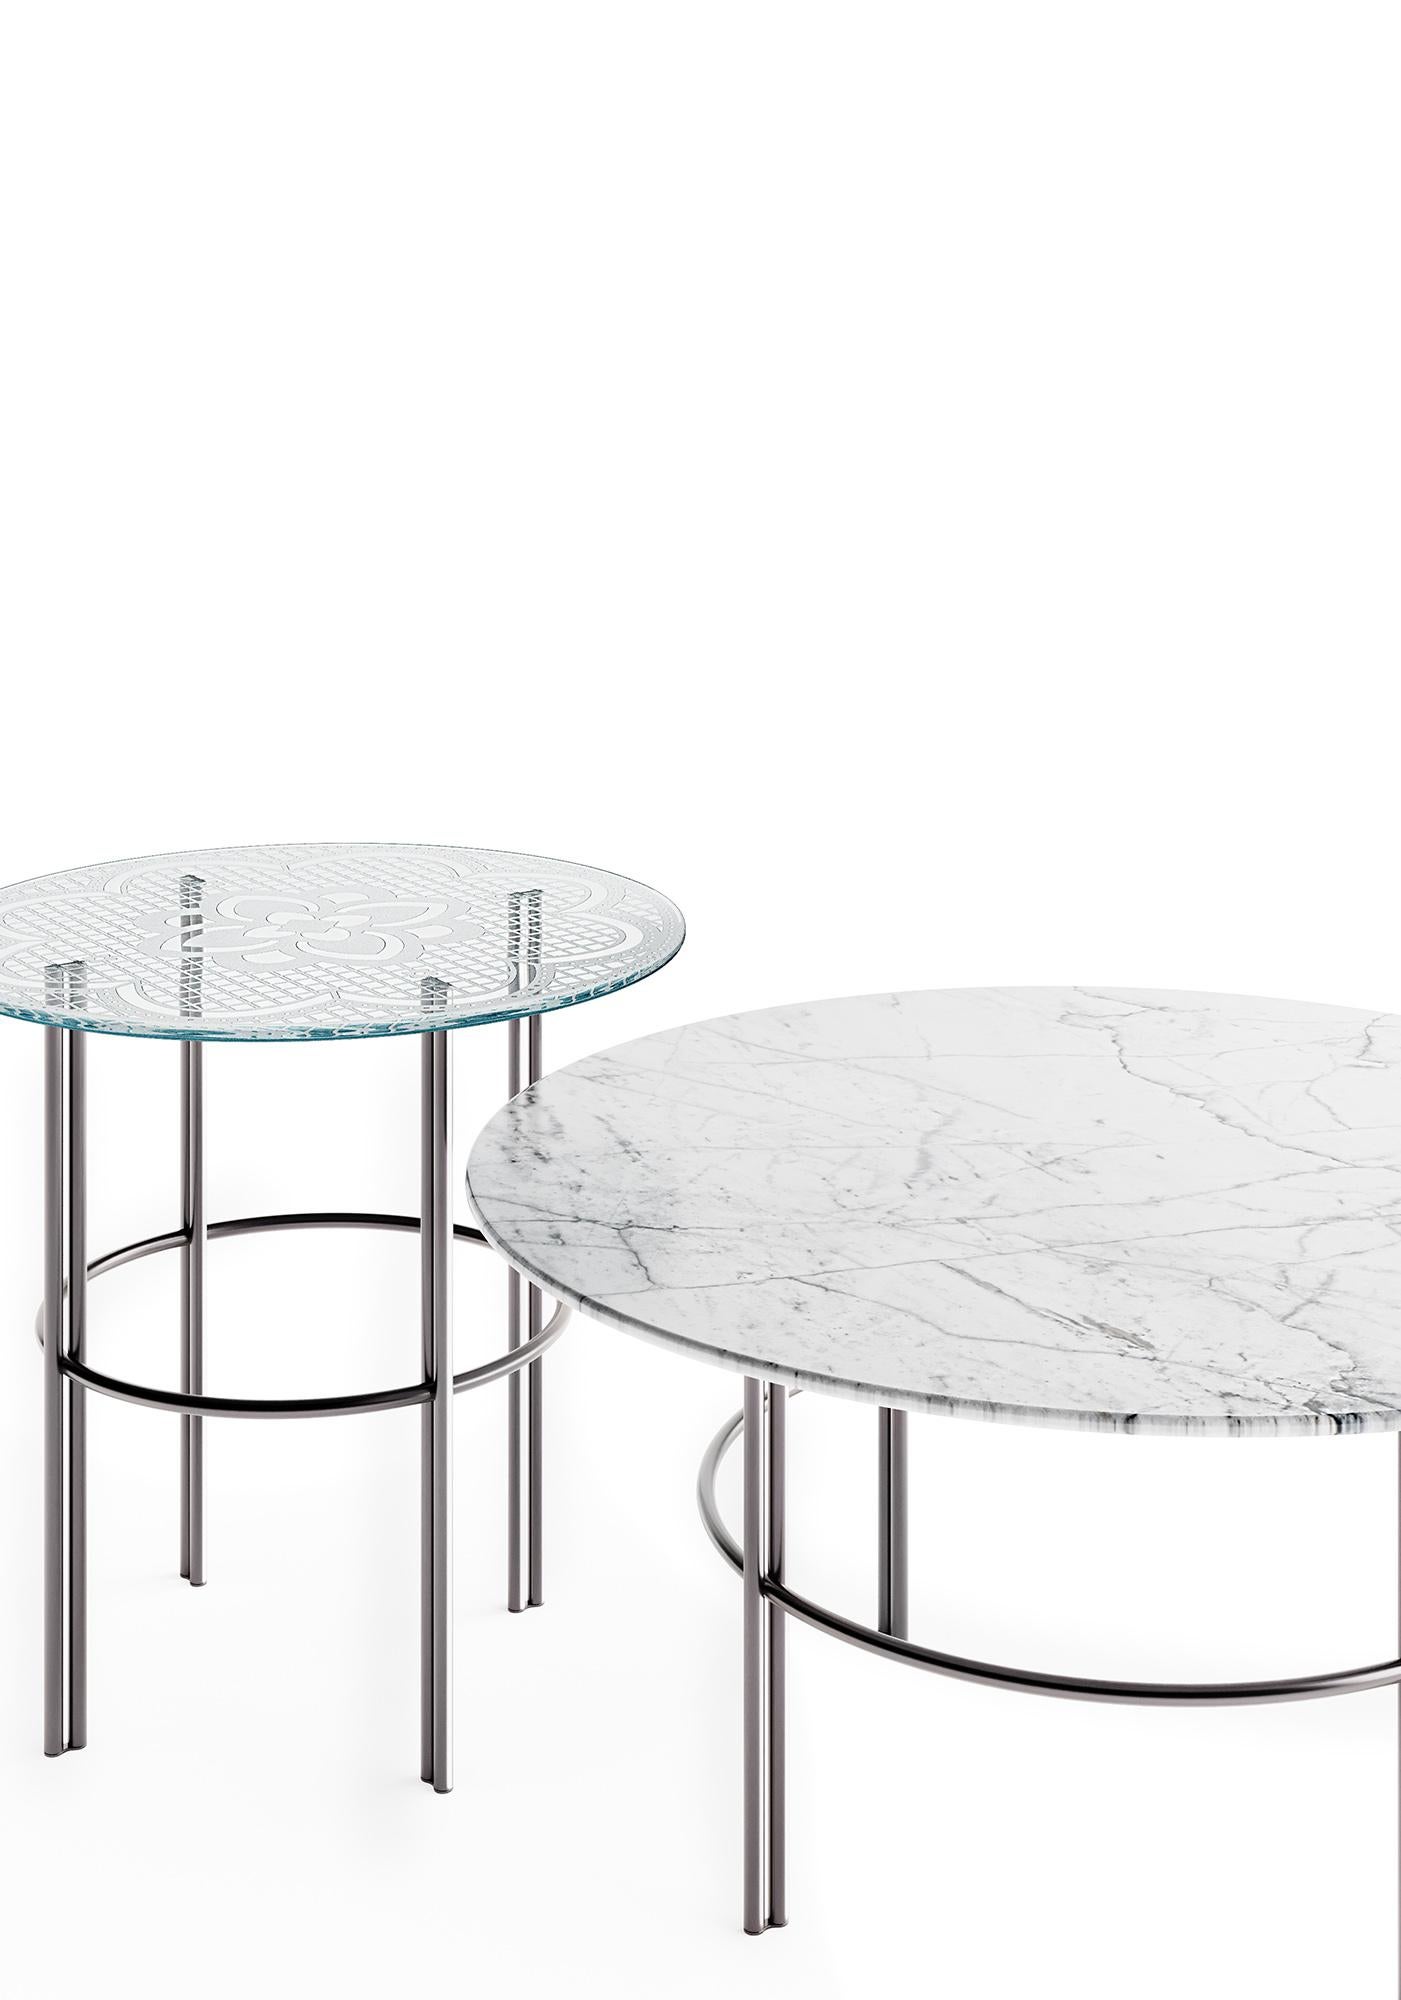 Contemporary Fiam Italia Set of Three Cristaline Glass Coffee Tables by Marcel Wanders Studio For Sale